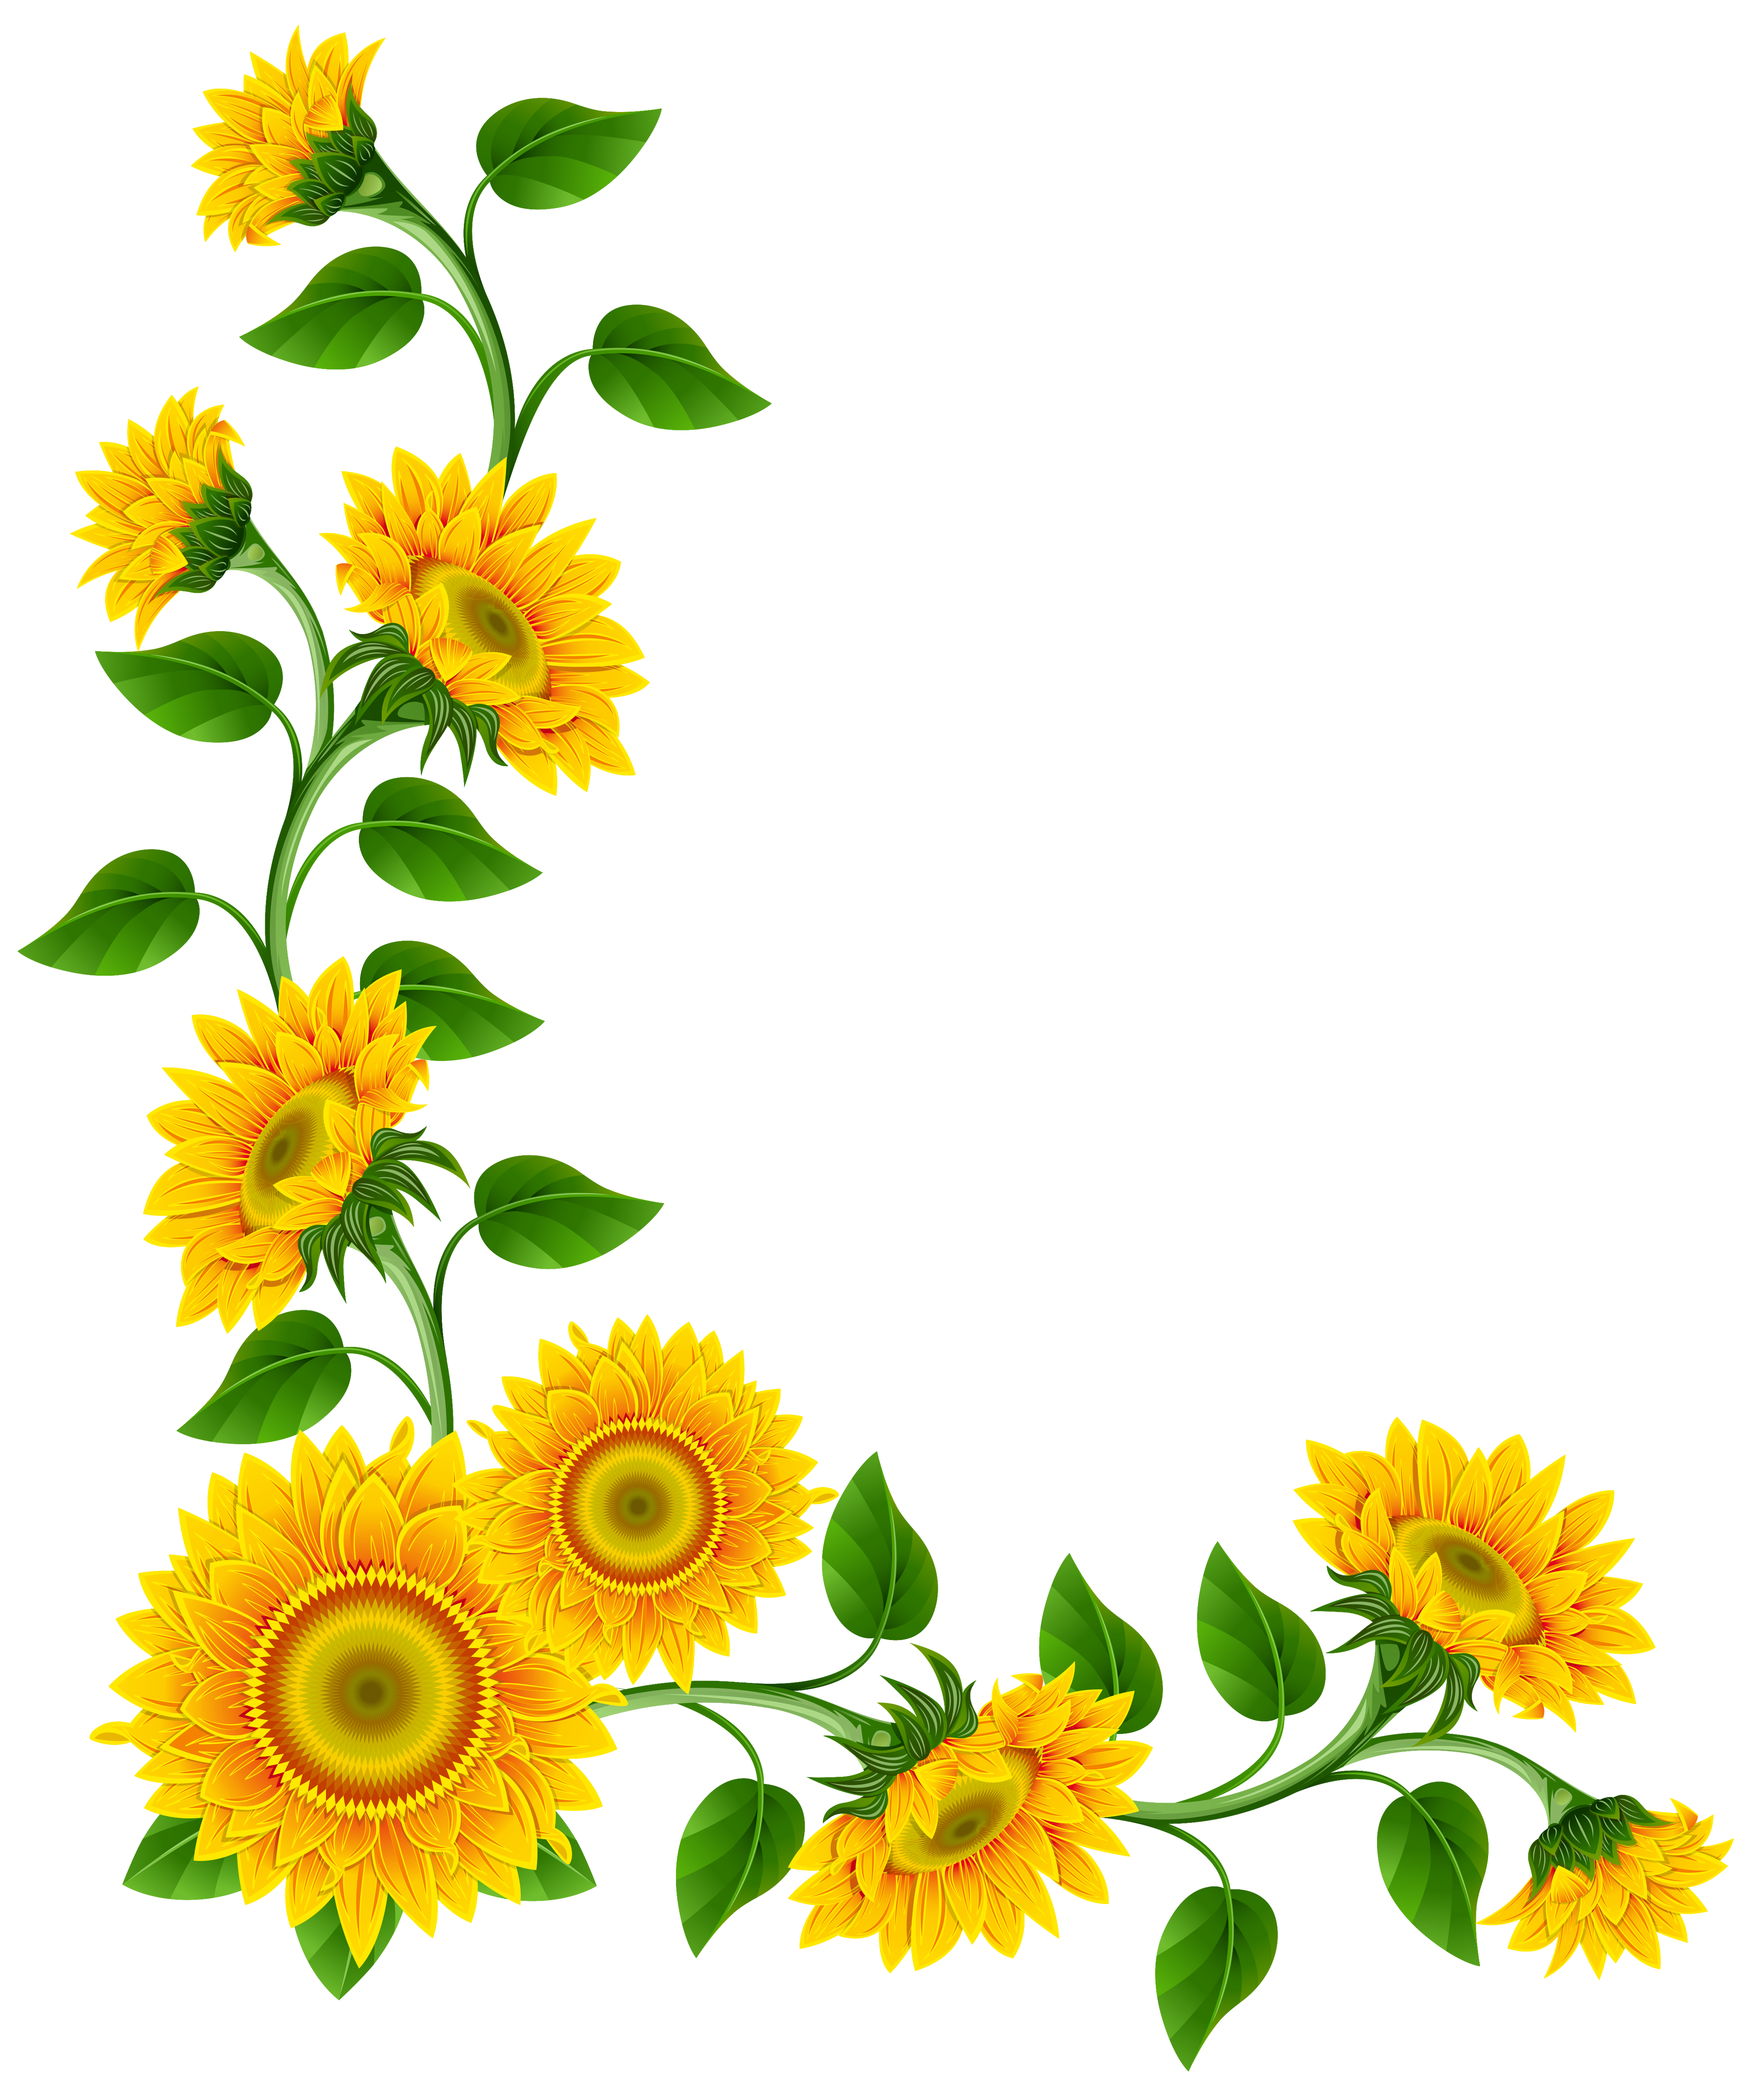 Decoration clipart image gallery. Sunflower border png